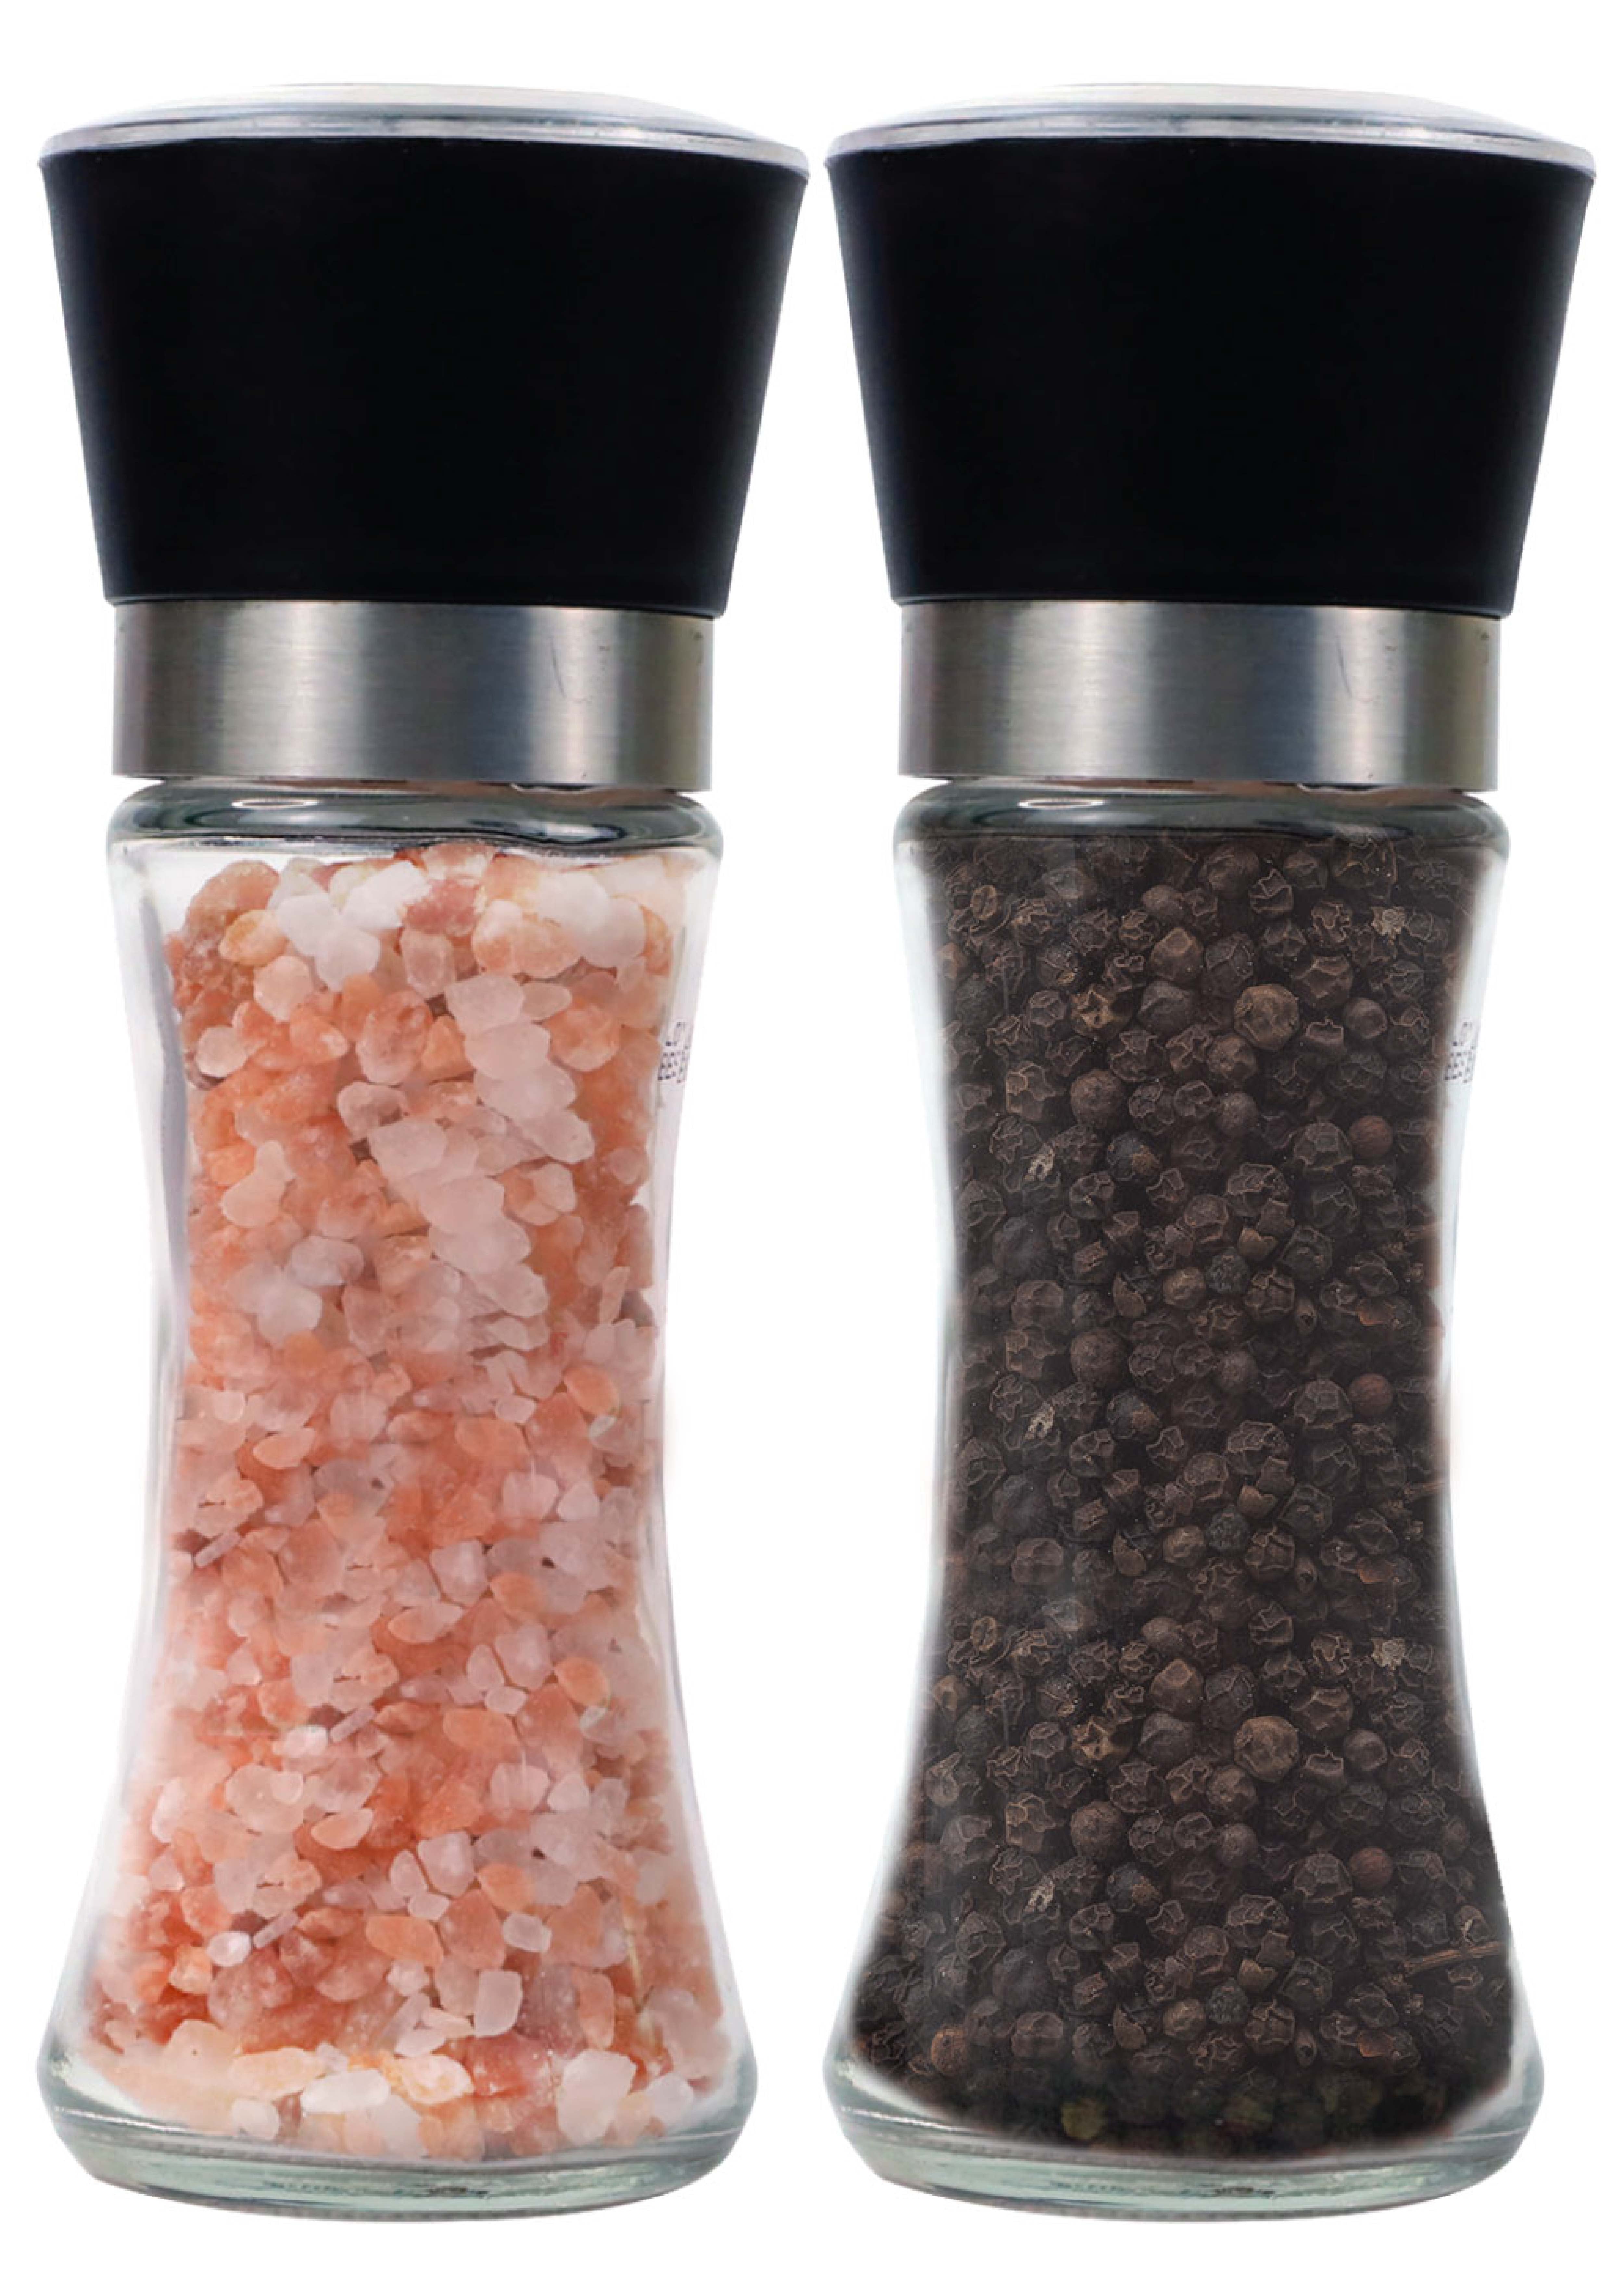 bonris Copper Stainless Steel Salt and Pepper Grinder Set Manual Himalayan  Pink Salt Mill|Salt and Pepper Shakers with Adjustable Coarseness and Clear